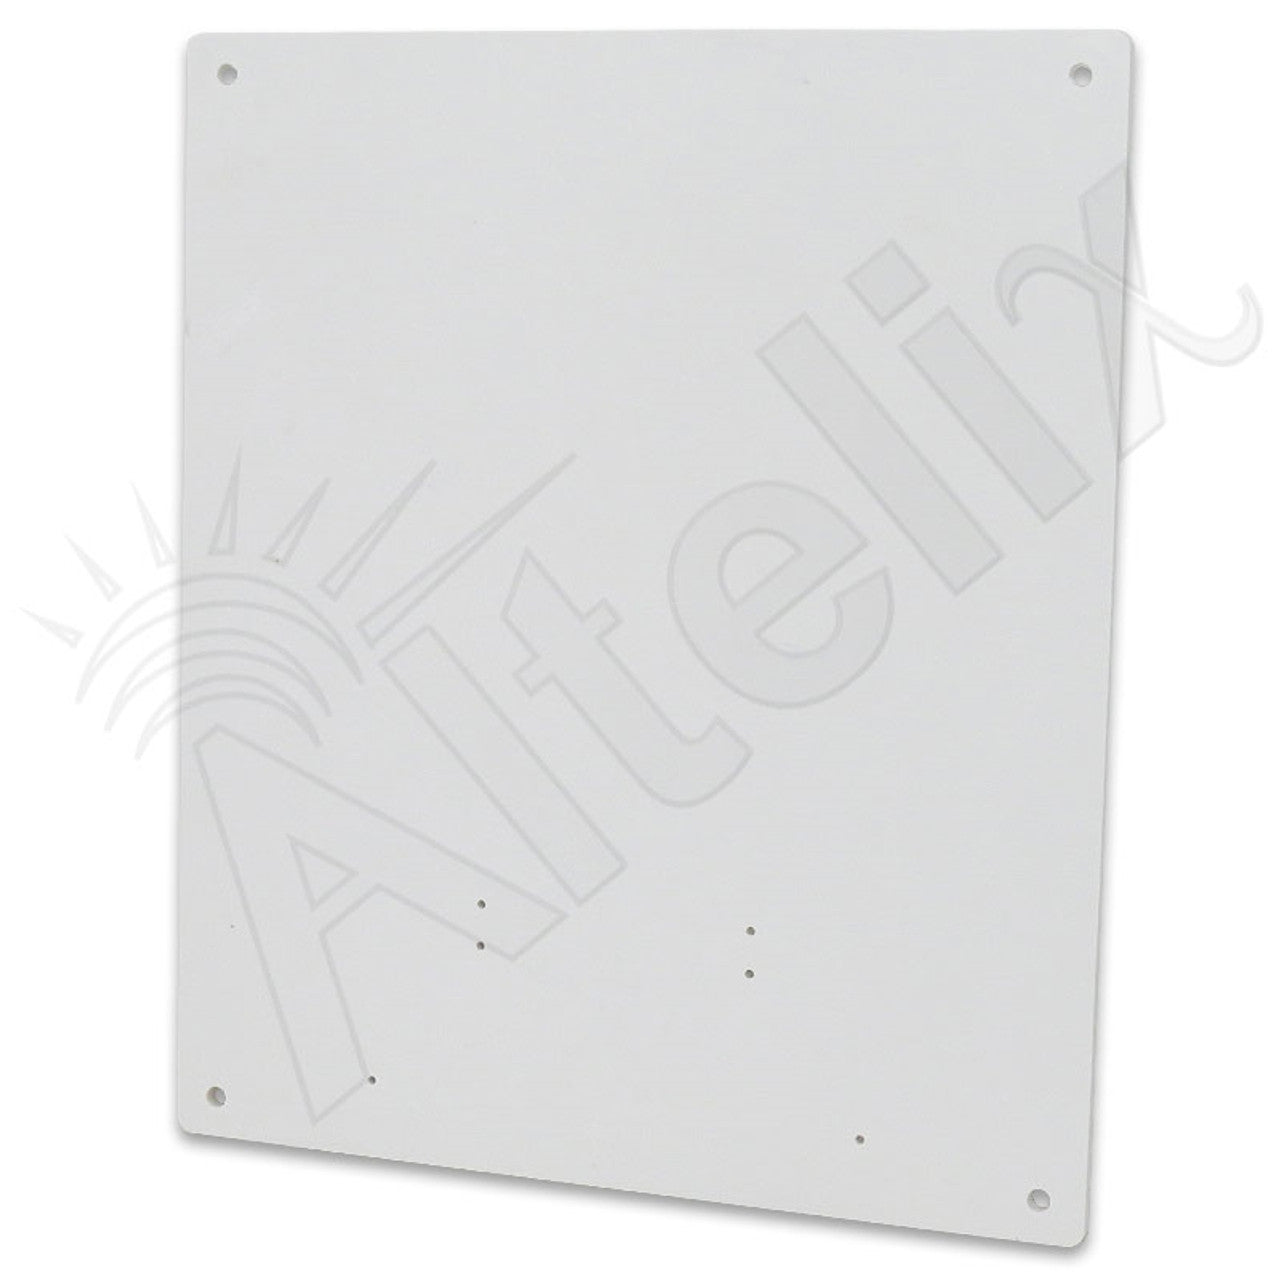 Blank Non-Metallic Equipment Mounting Plate for NF141206 & NF141208 Series Enclosures